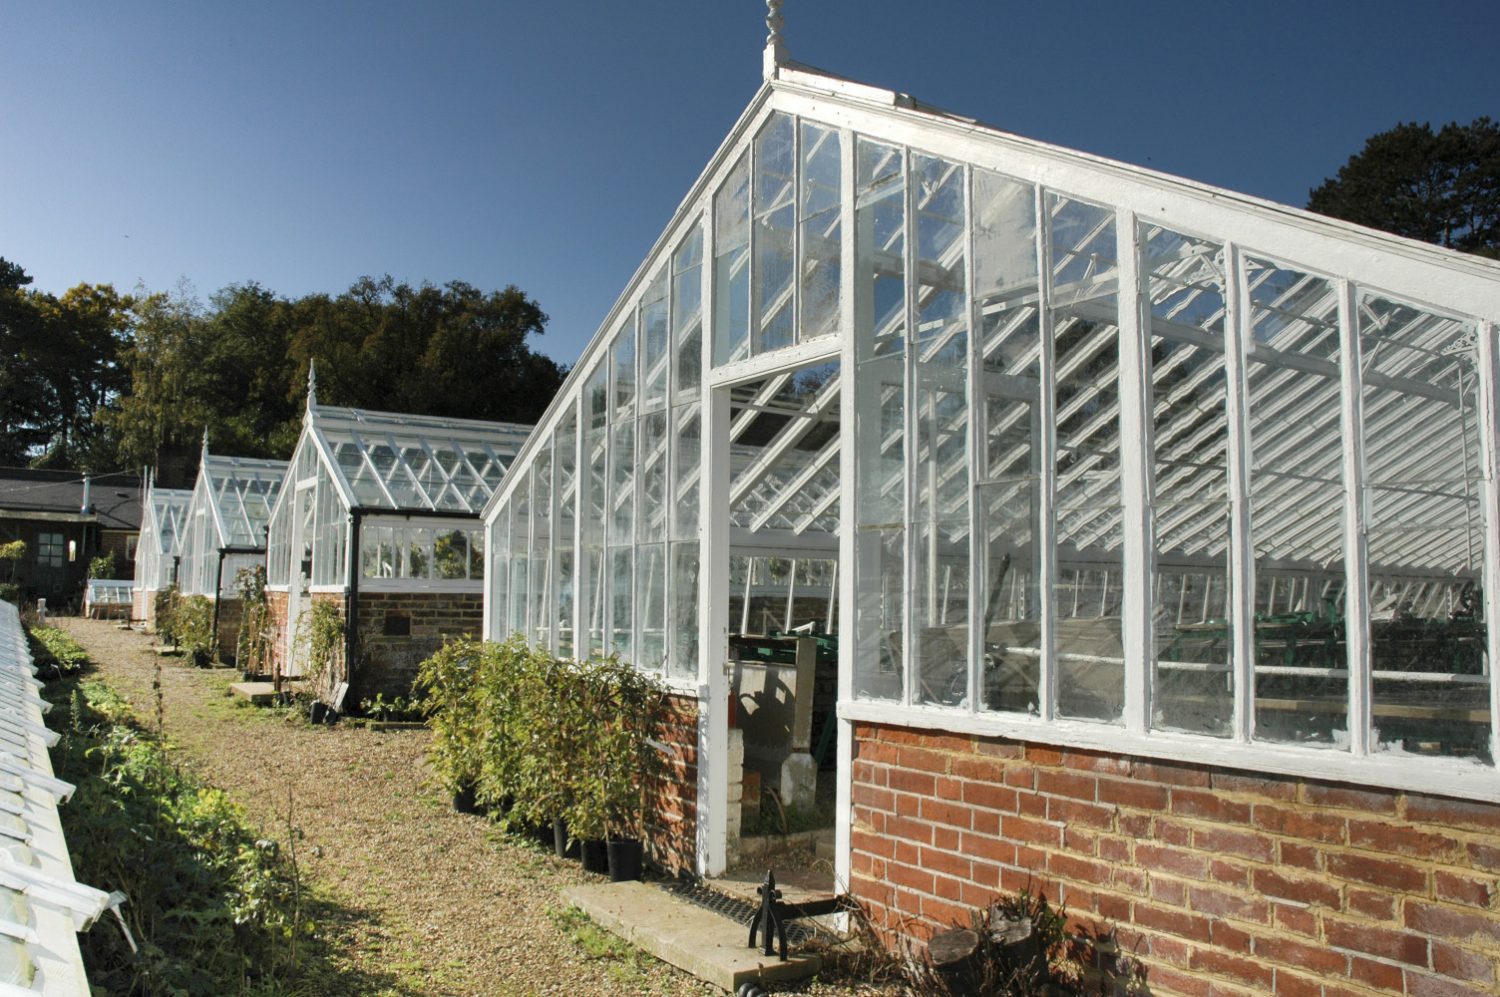 the renovated Victorian green houses at the Walled Nursey, in Hawkhurst